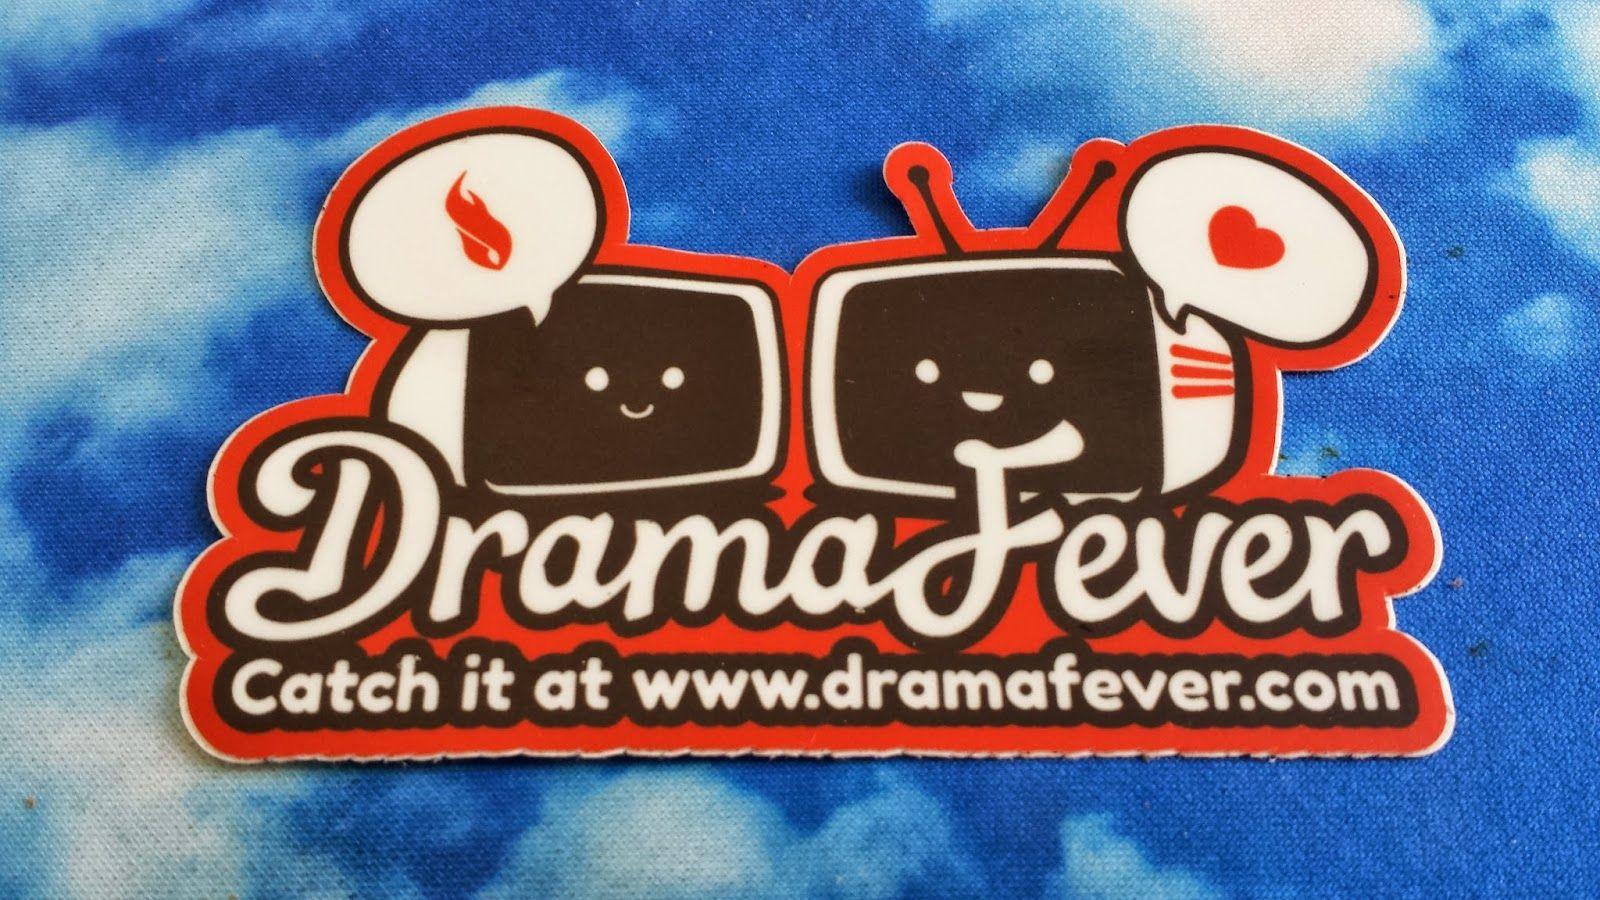 DramaFever Logo - What is DramaFever & How to Watch DramaFever Outside the USA